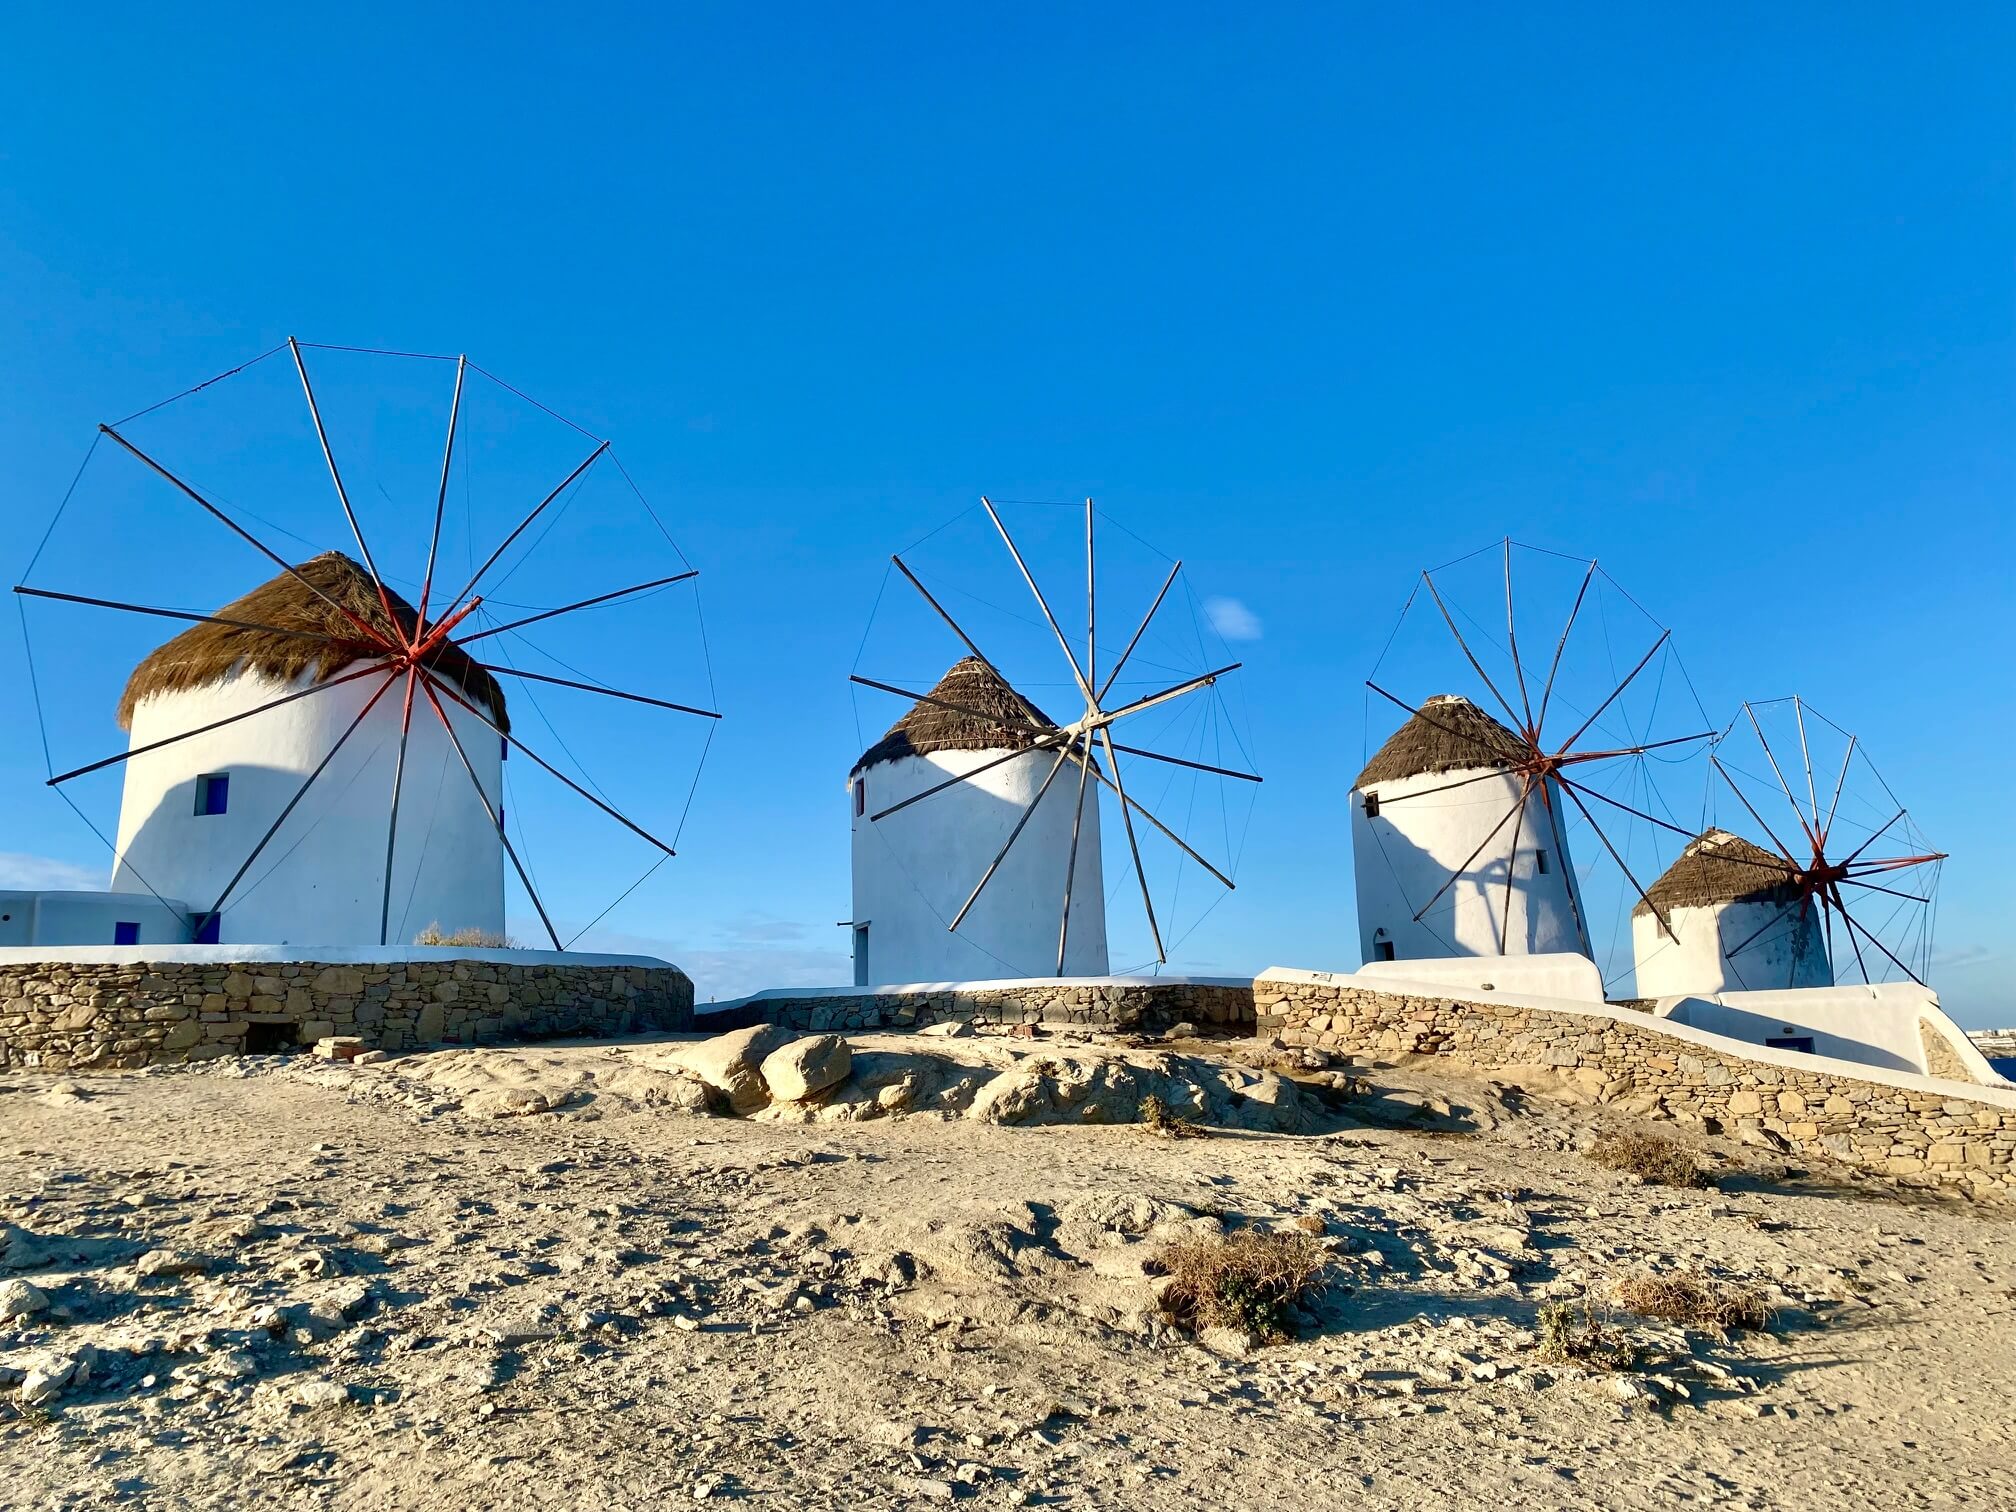 4 iconic white windmills of Mykonos with thatched rooves